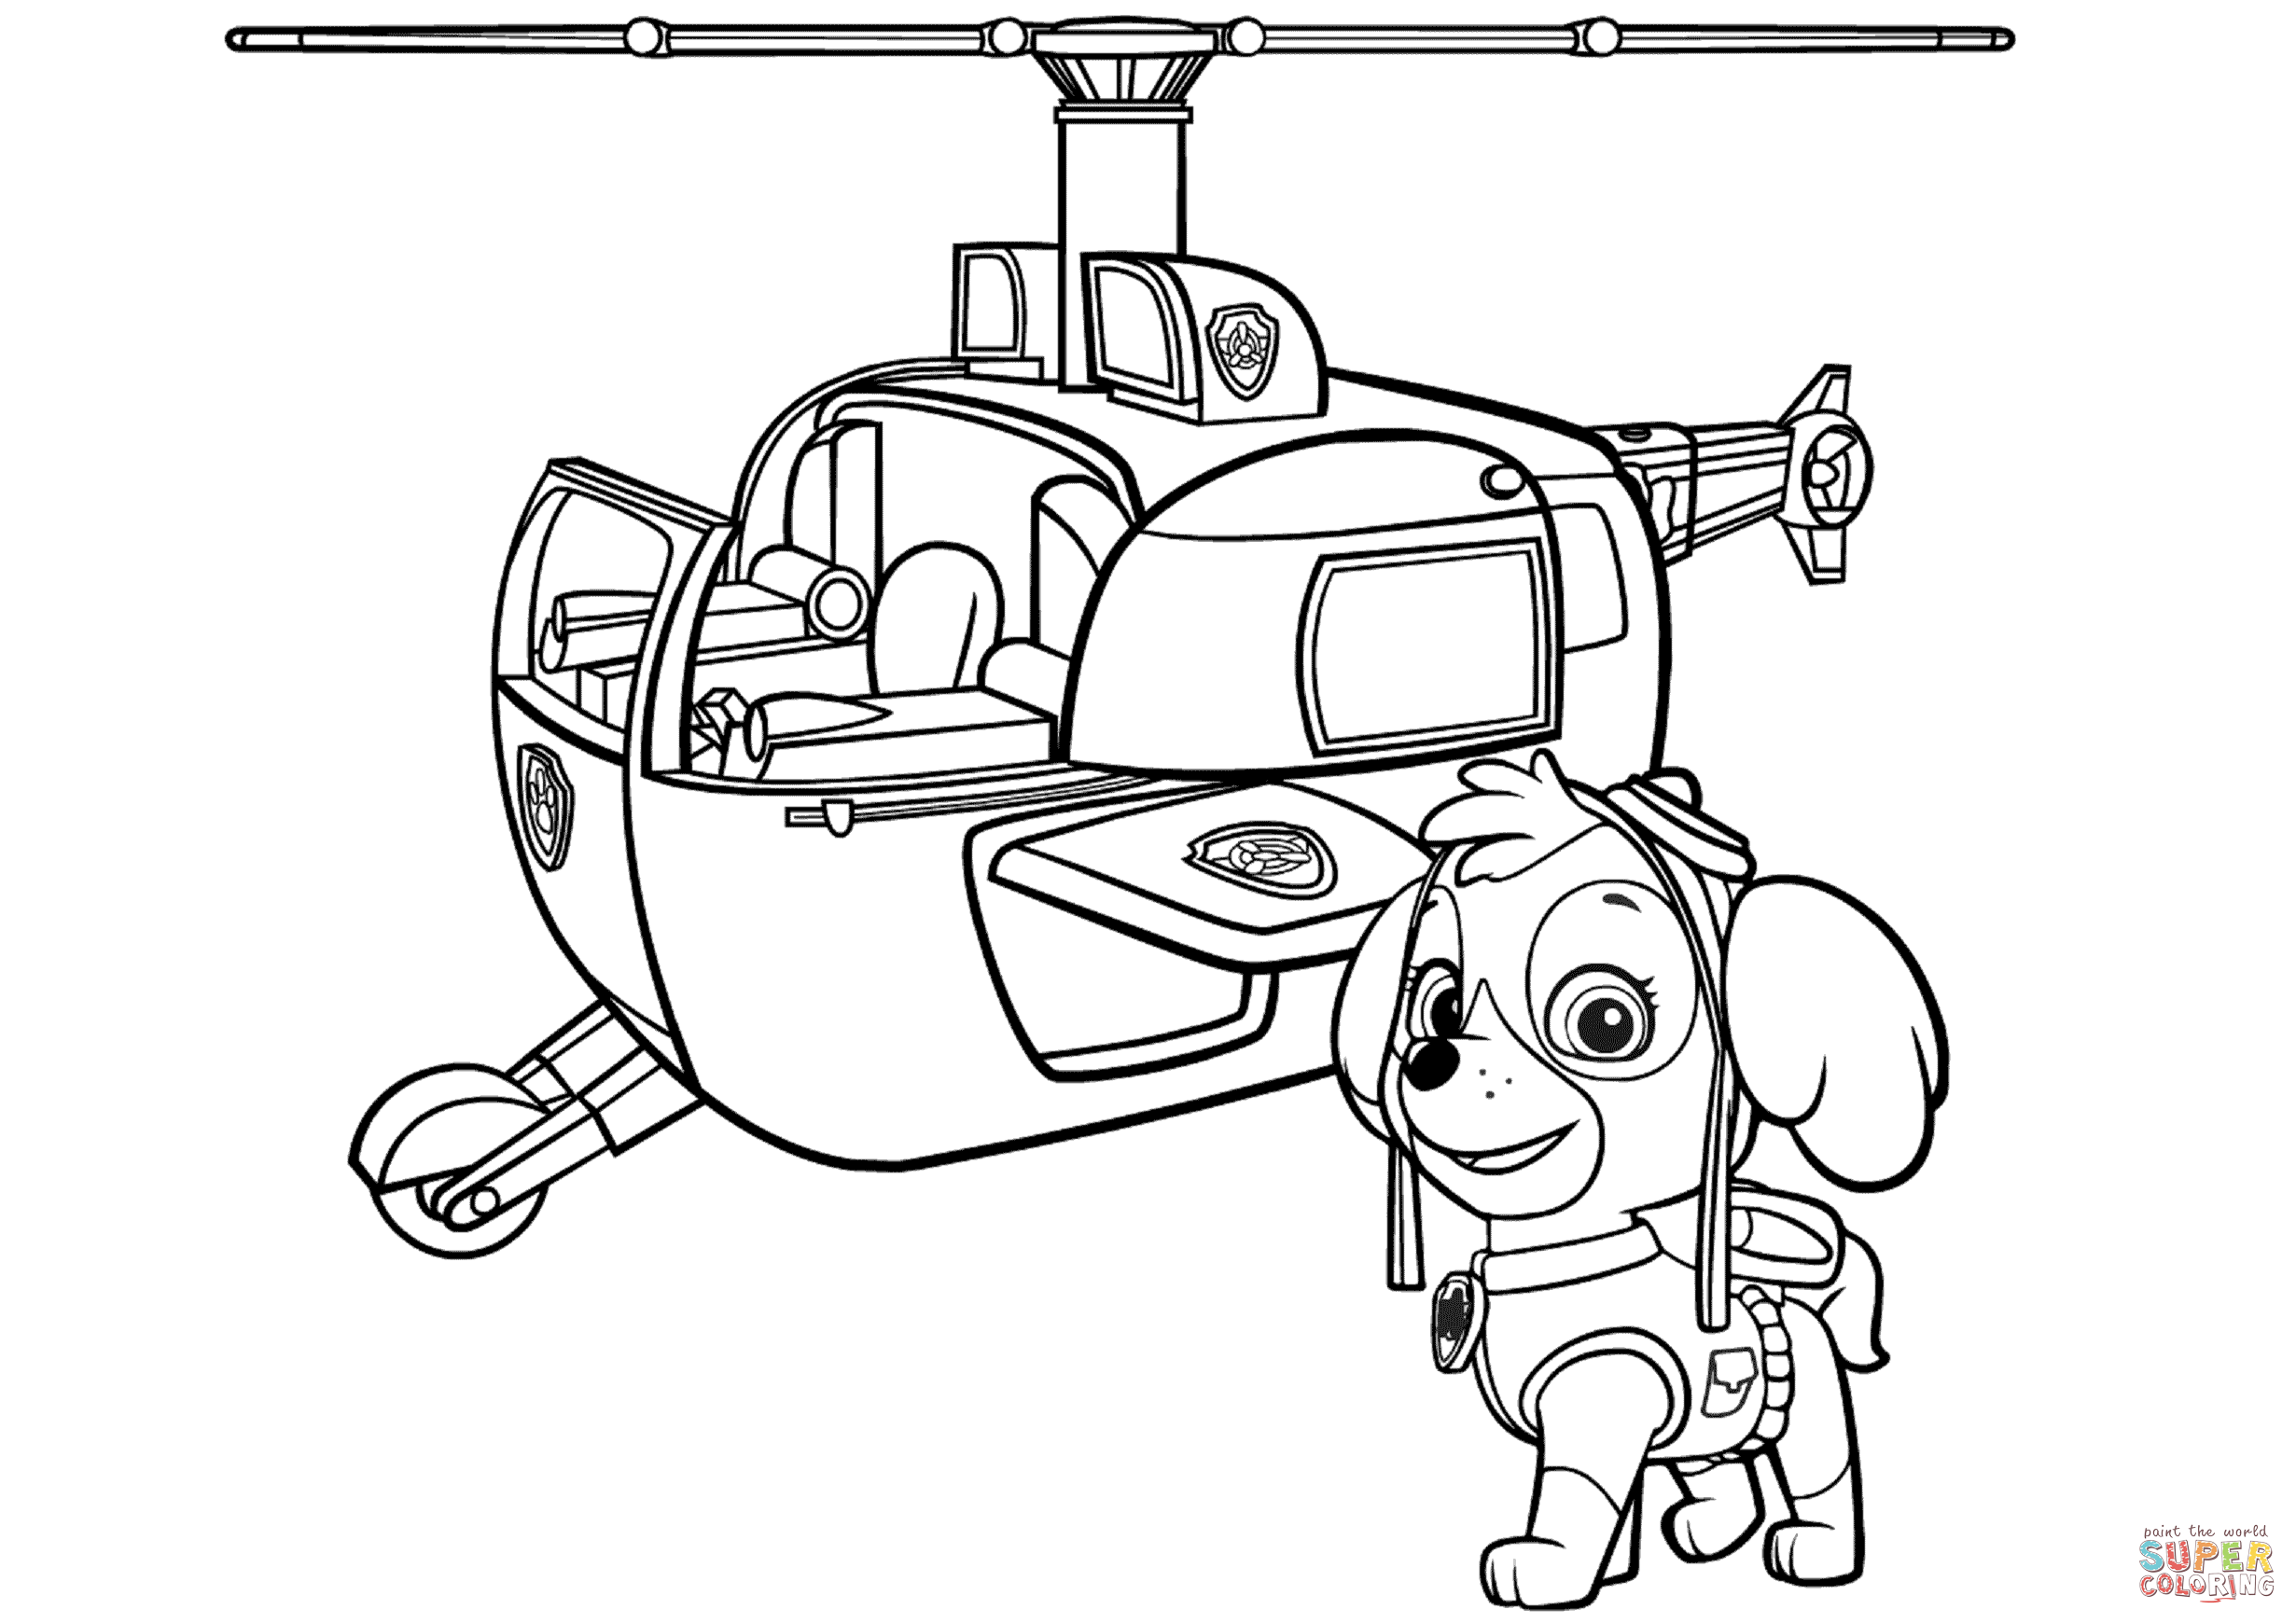 Paw patrol skyes helicopter coloring page free printable coloring pages